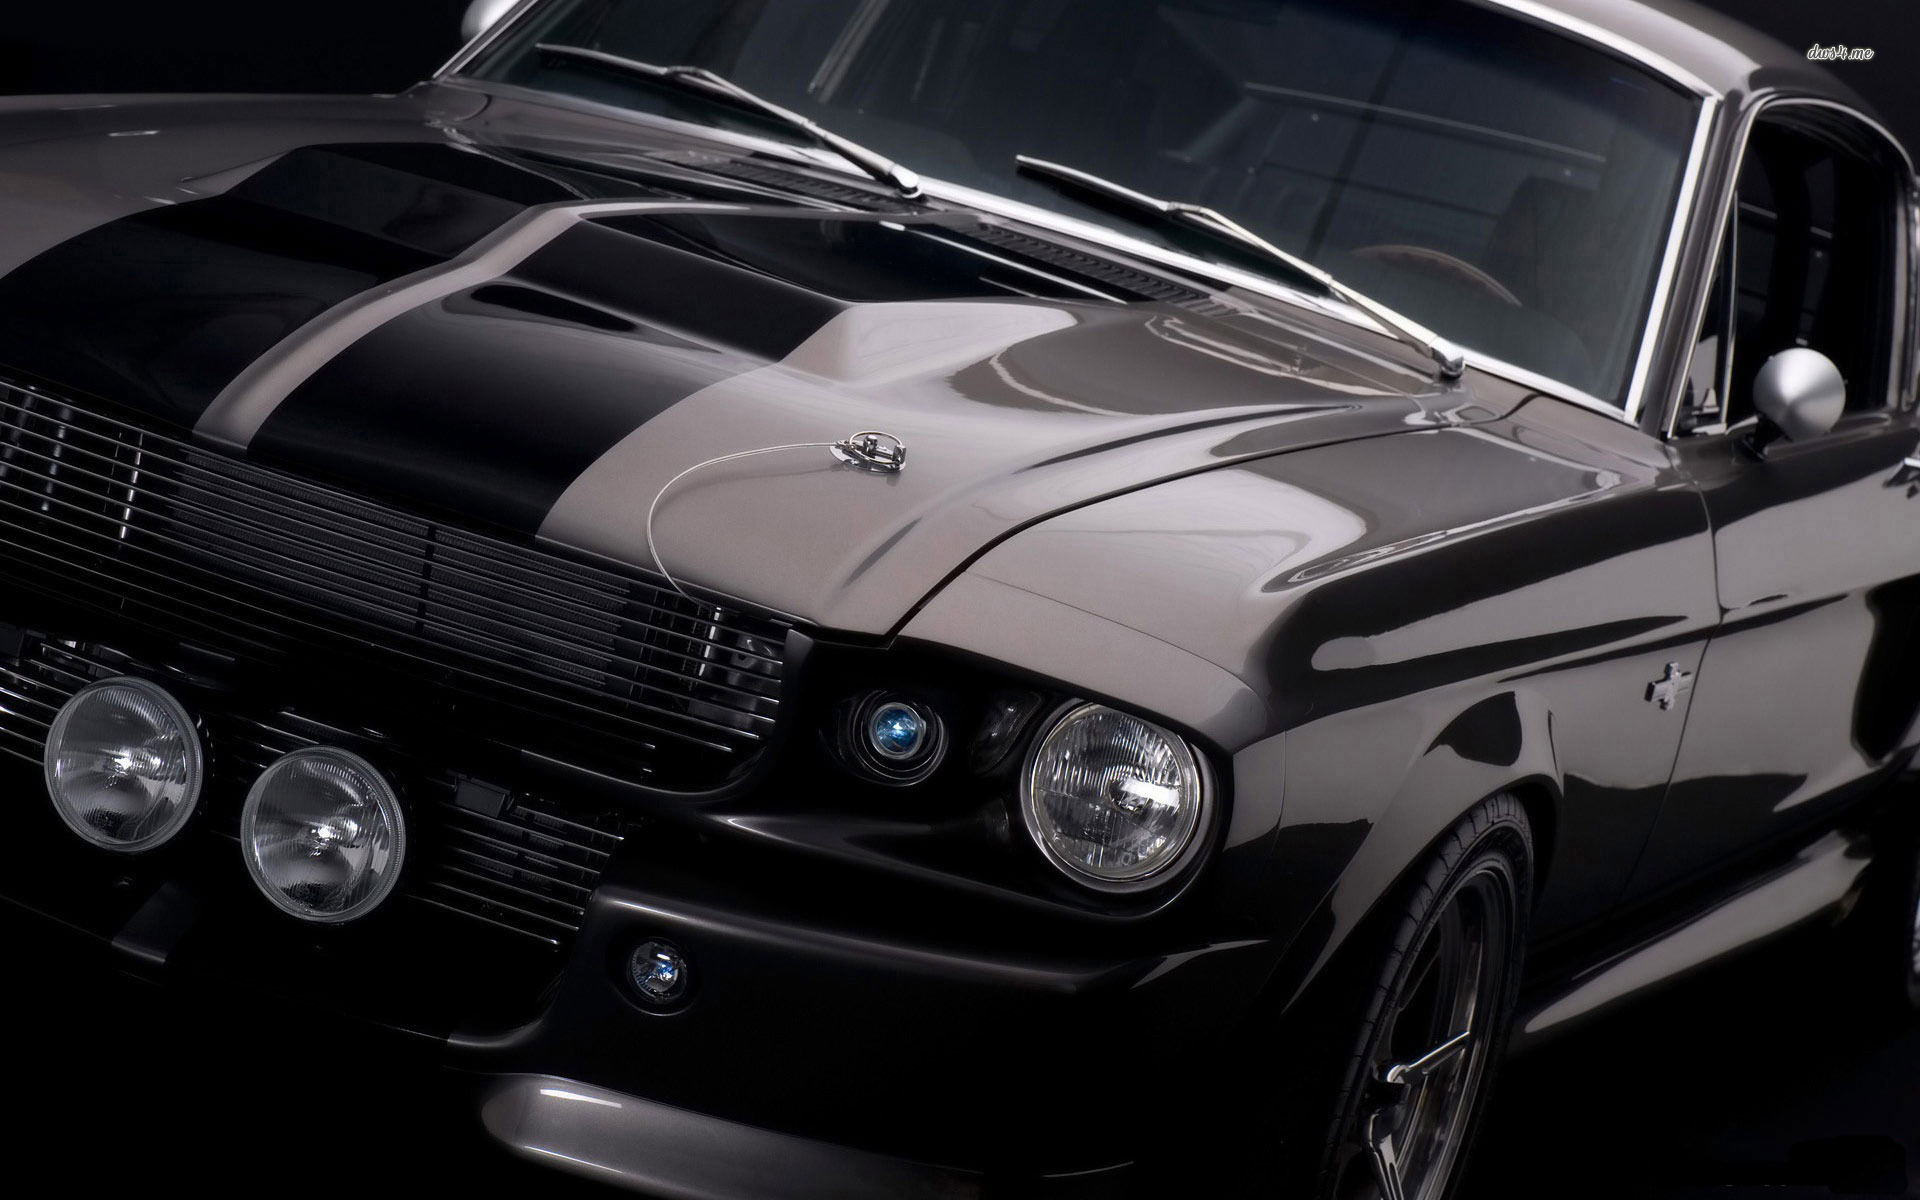 Ford Shelby Mustang Gt500 Eleanor Wallpaper Car